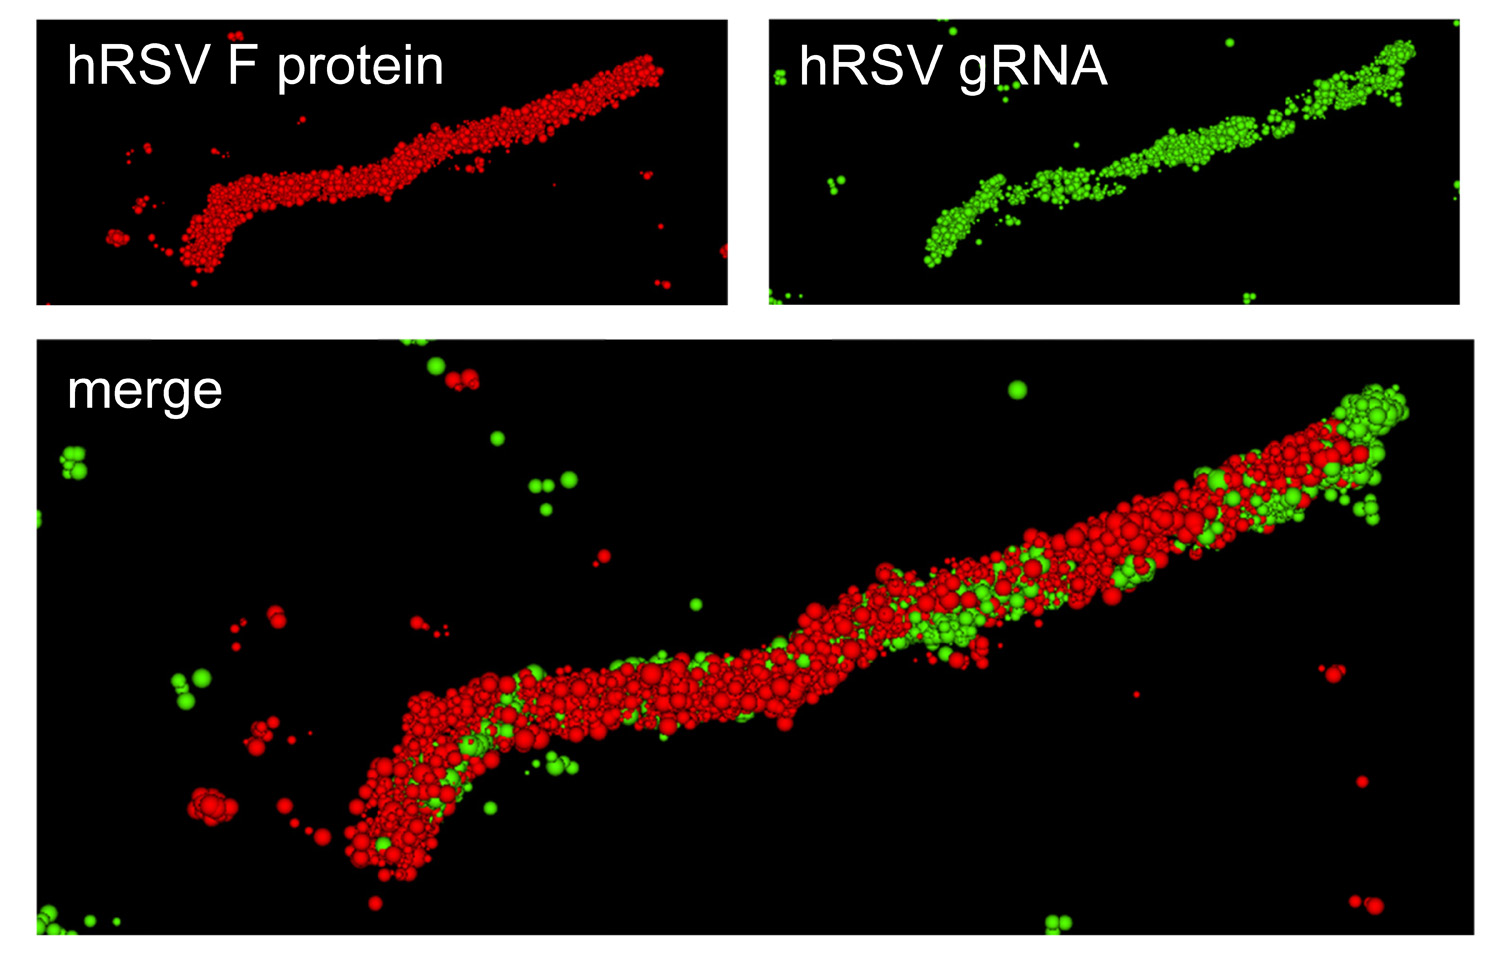 A super-resolution optical image of a specific hRSV viral filament produced with dSTORM technology. The viral filament is approximately 4 microns in length, typical of hRSV. (Image courtesy of Eric Alonas and Philip Santangelo)